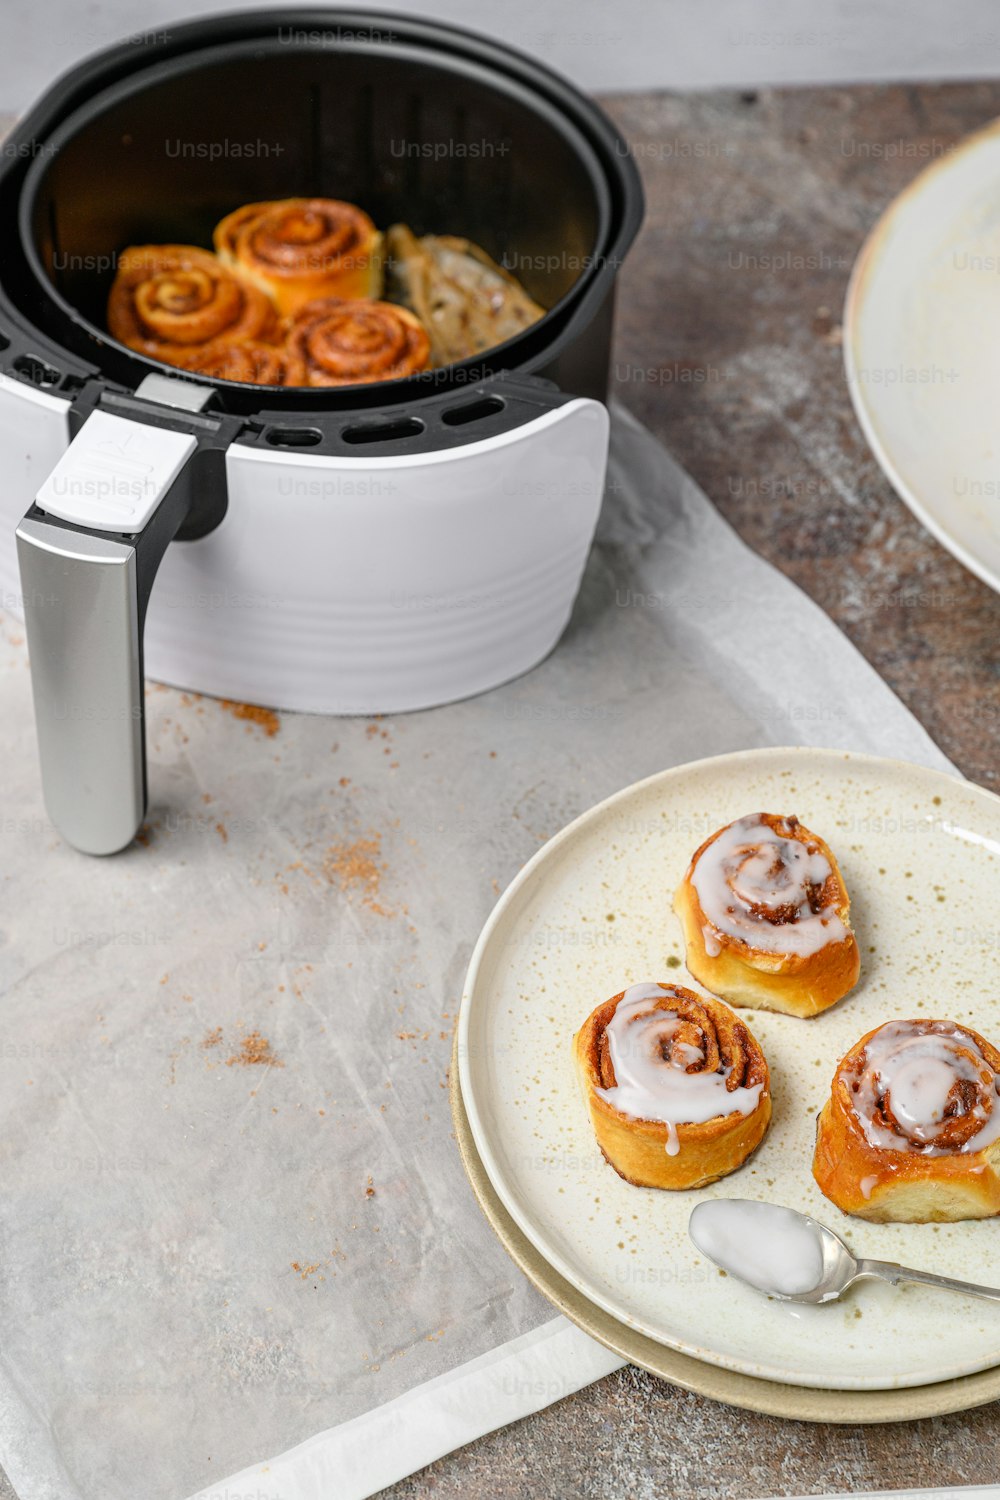 a plate of cinnamon rolls next to a slow cooker